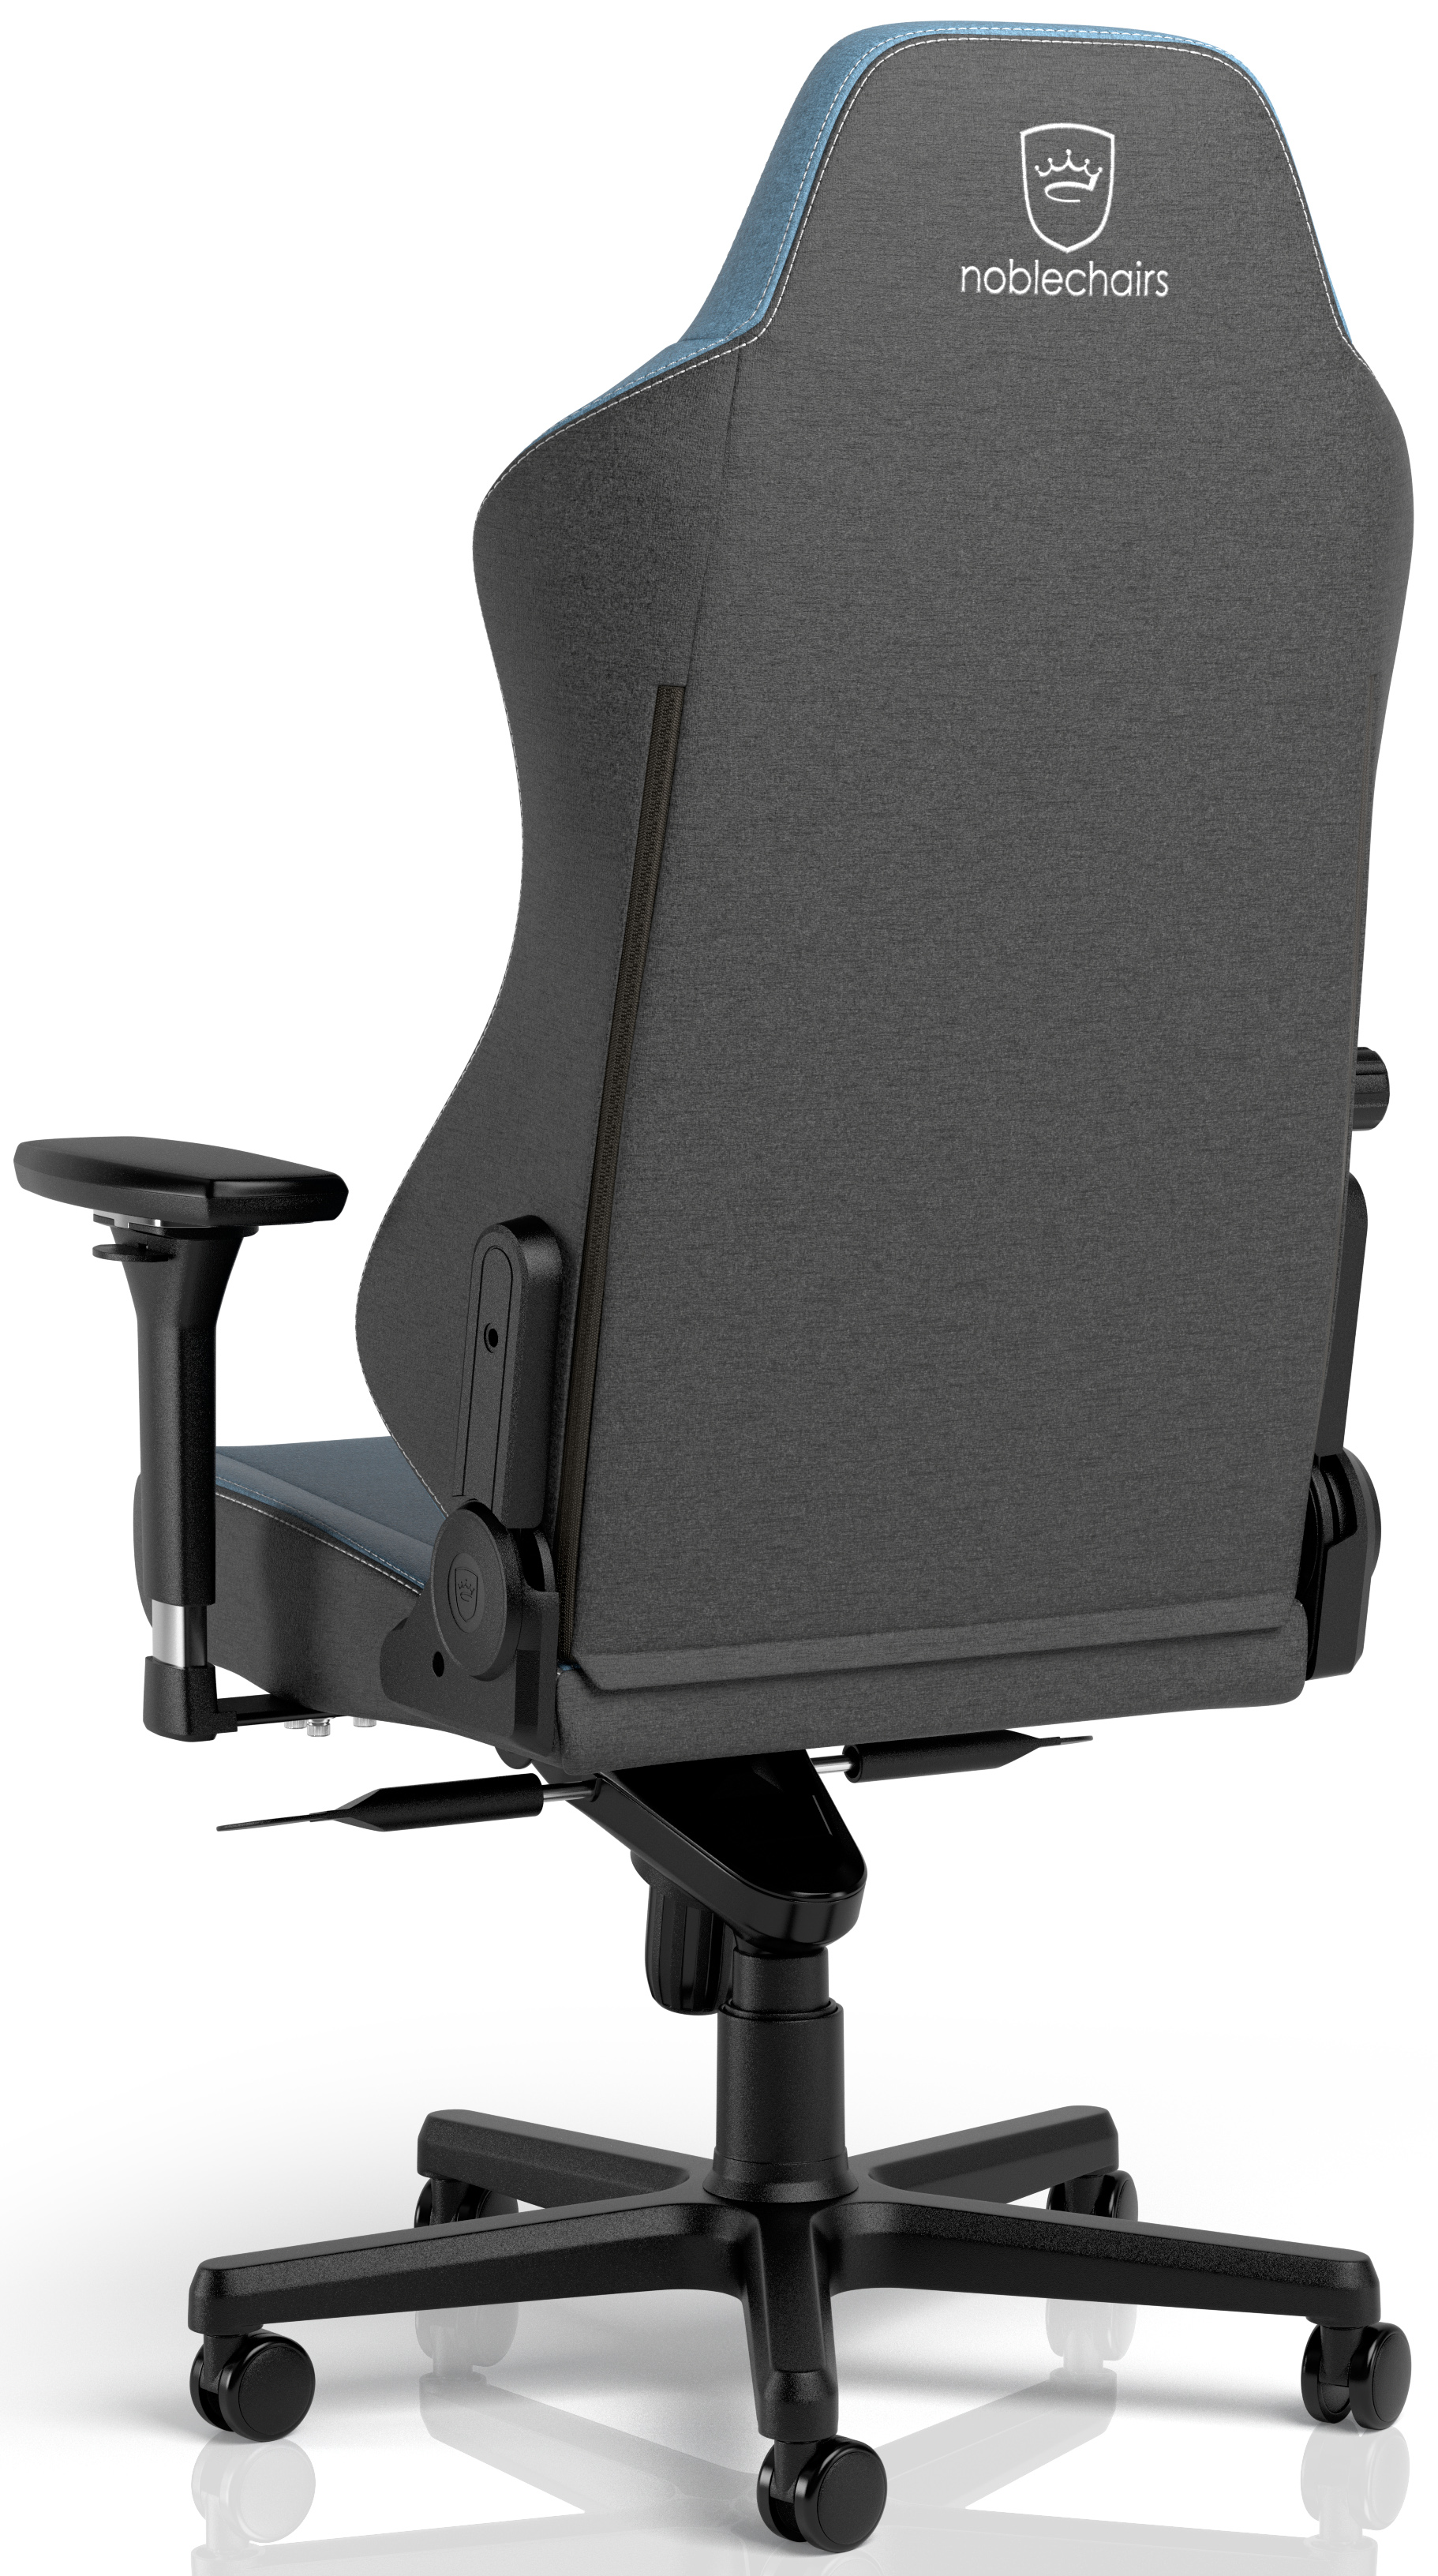 noblechairs - ** B Grade ** Cadeira noblechairs Hero Two Tone - Blue Limited Edition